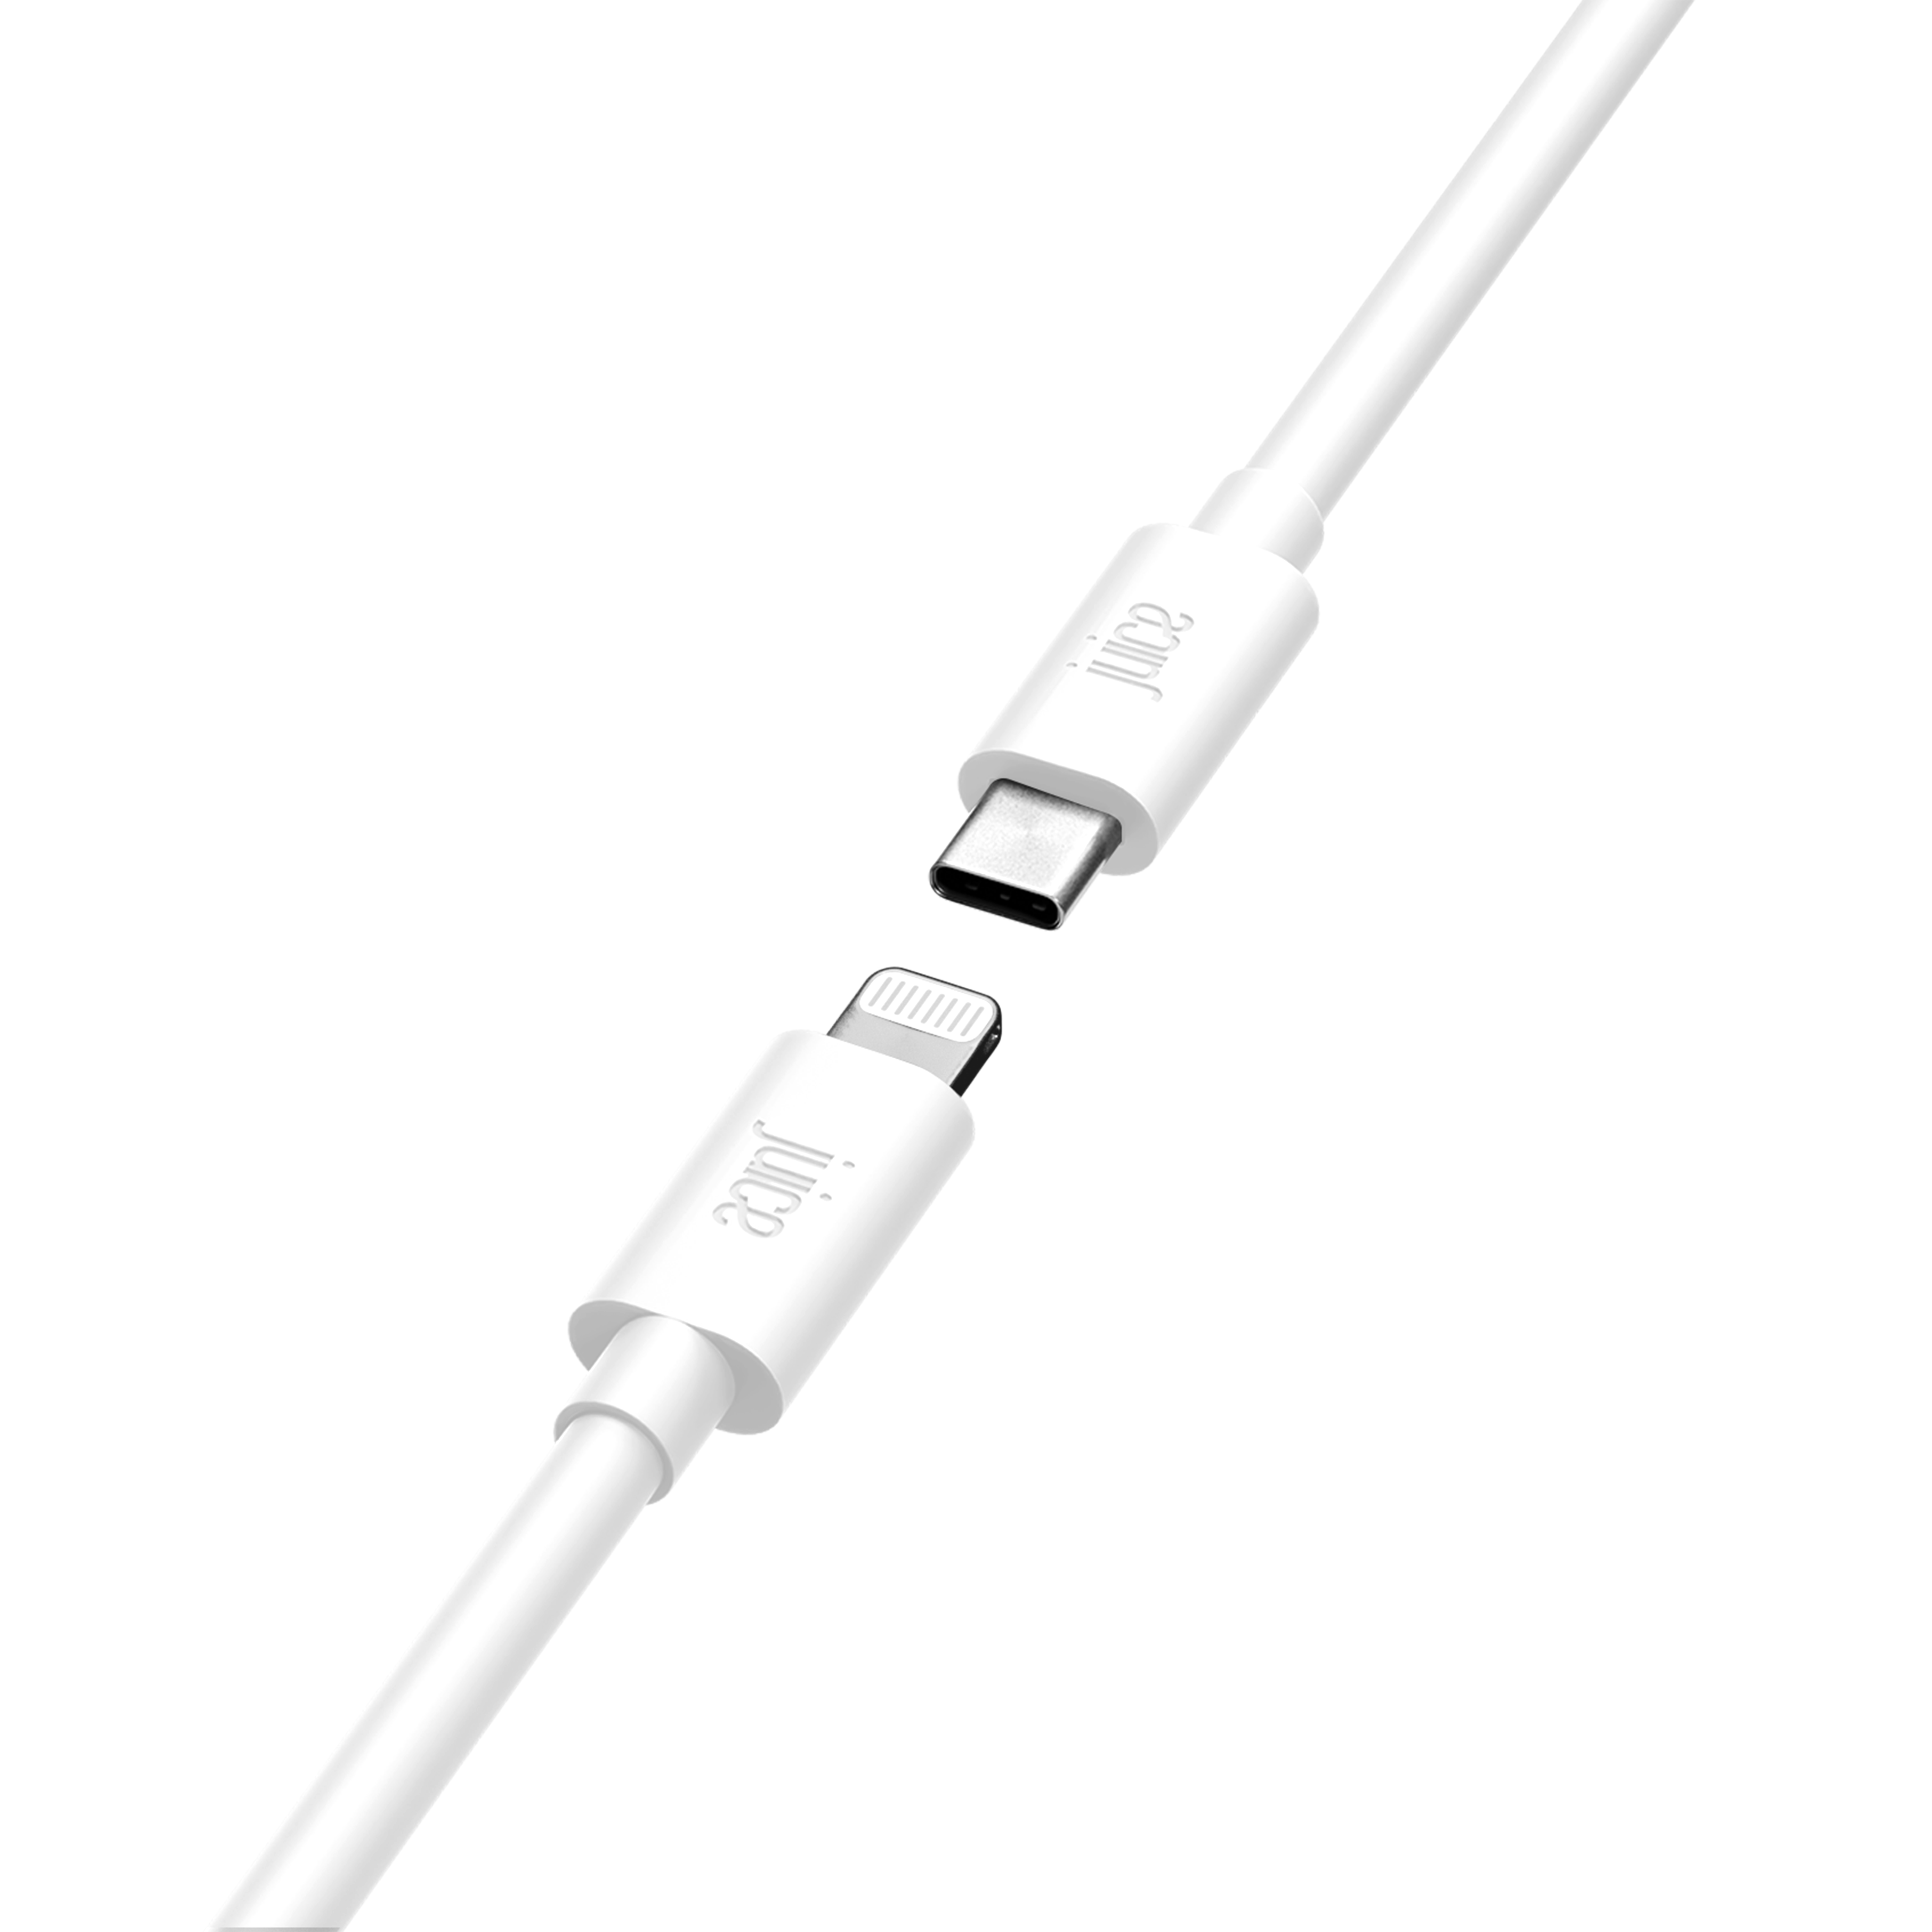 JuicEBitz - Best USB Charger Cables for iPhone, iPad, iPod - UK